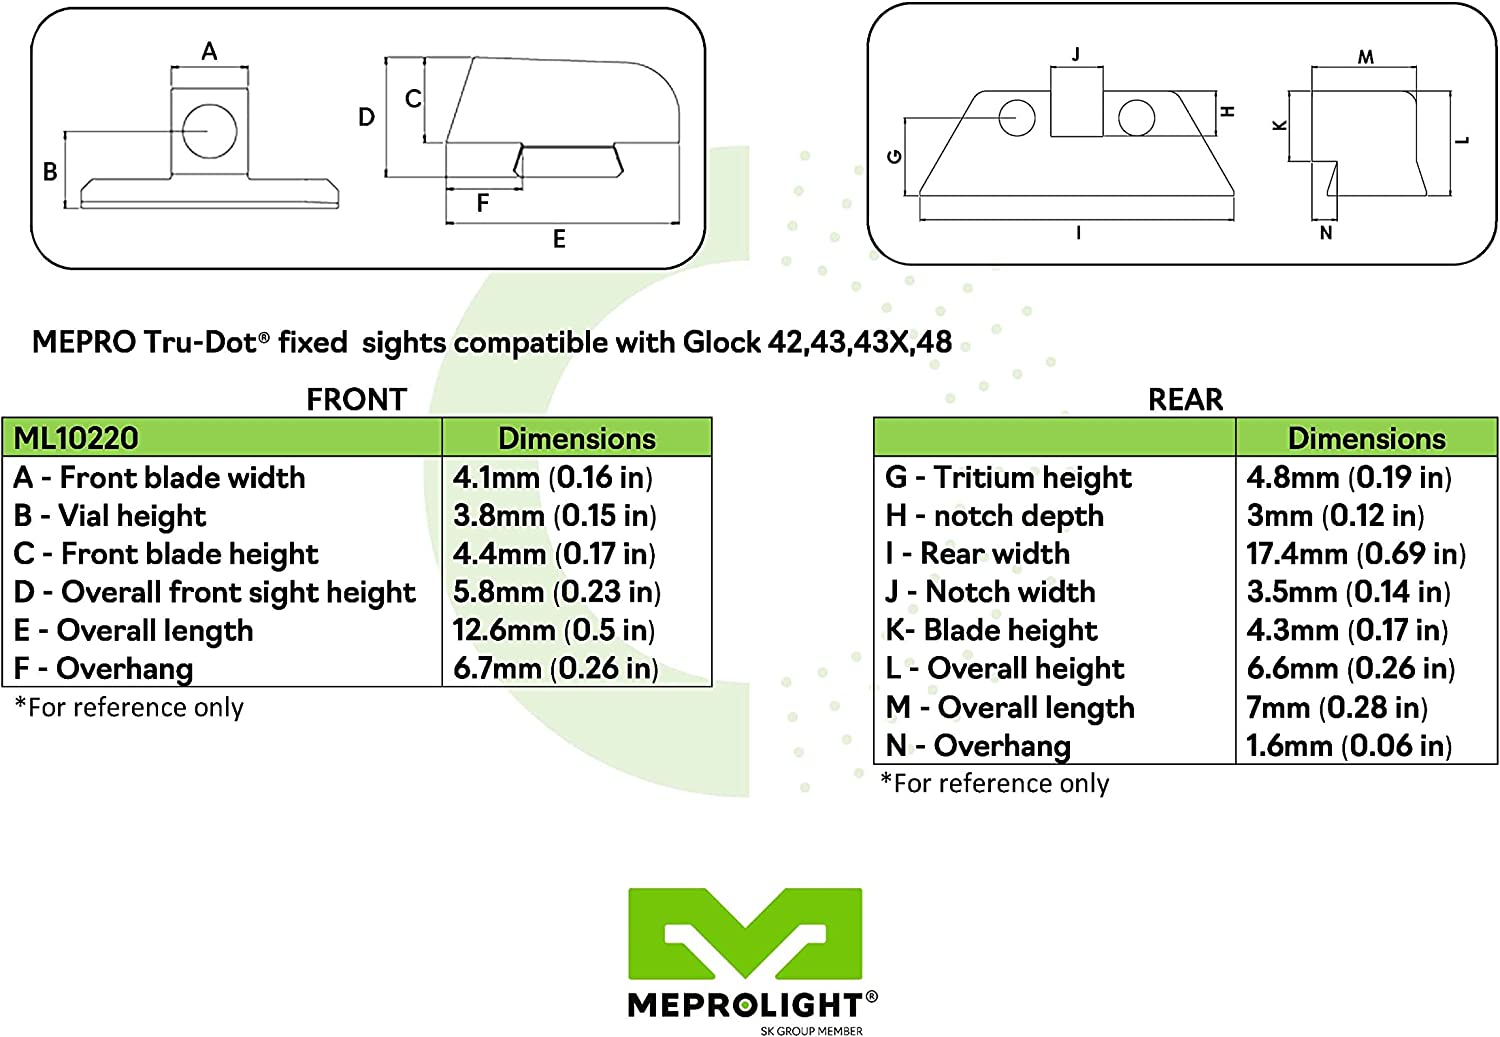 Sight chart for the Glock 42, 43, 43X, 48